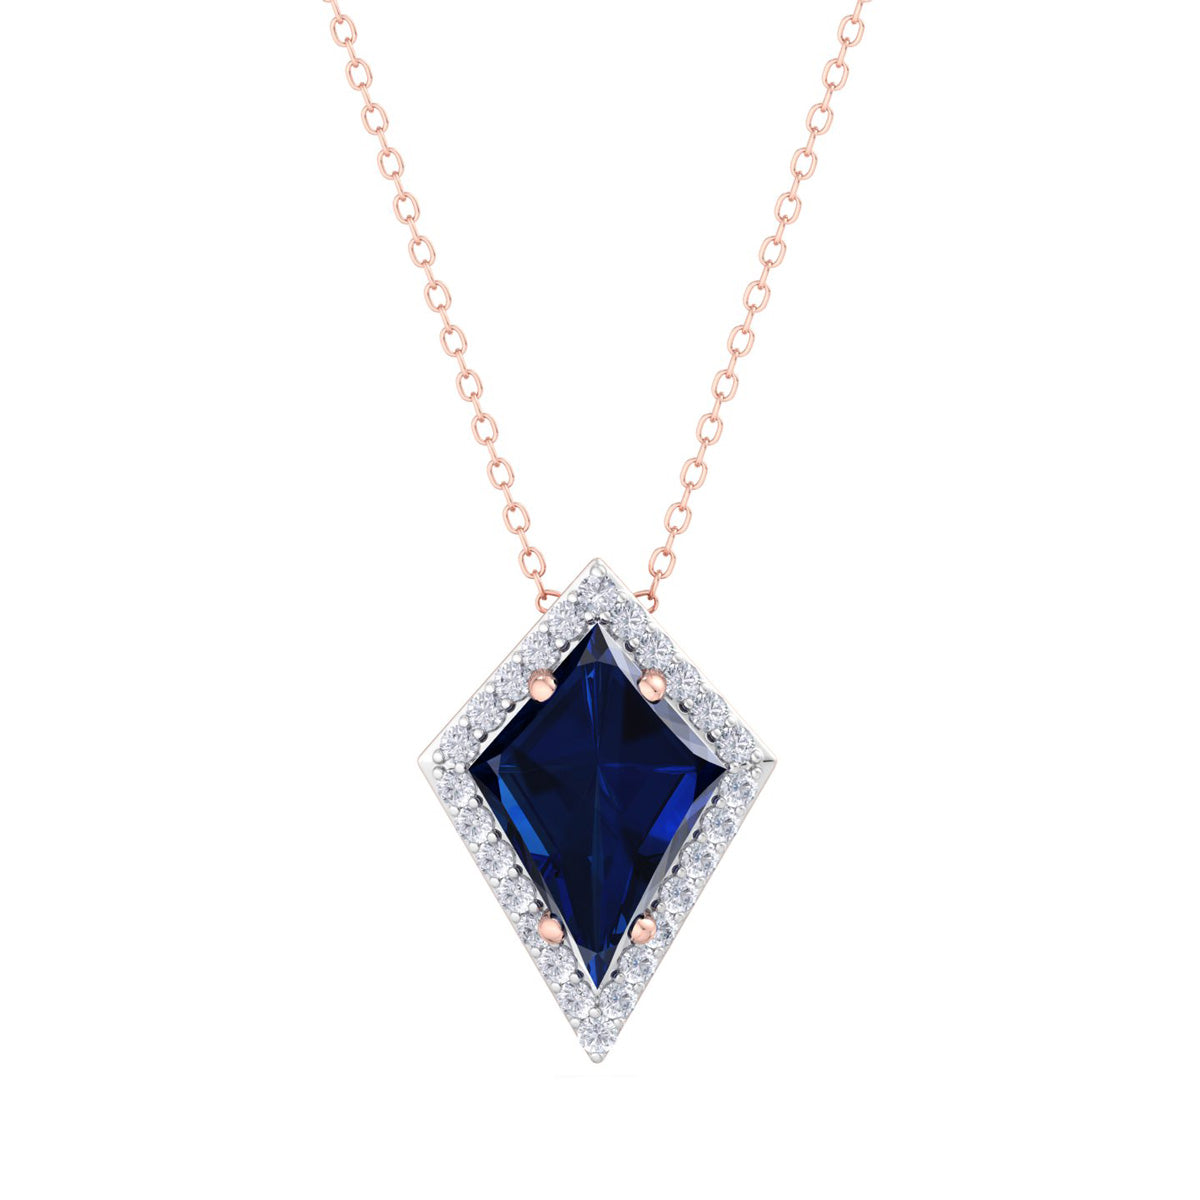 Sselects 1 3/4 Carat Kite Shape Sapphire And Diamond Necklace In 14k In Multi